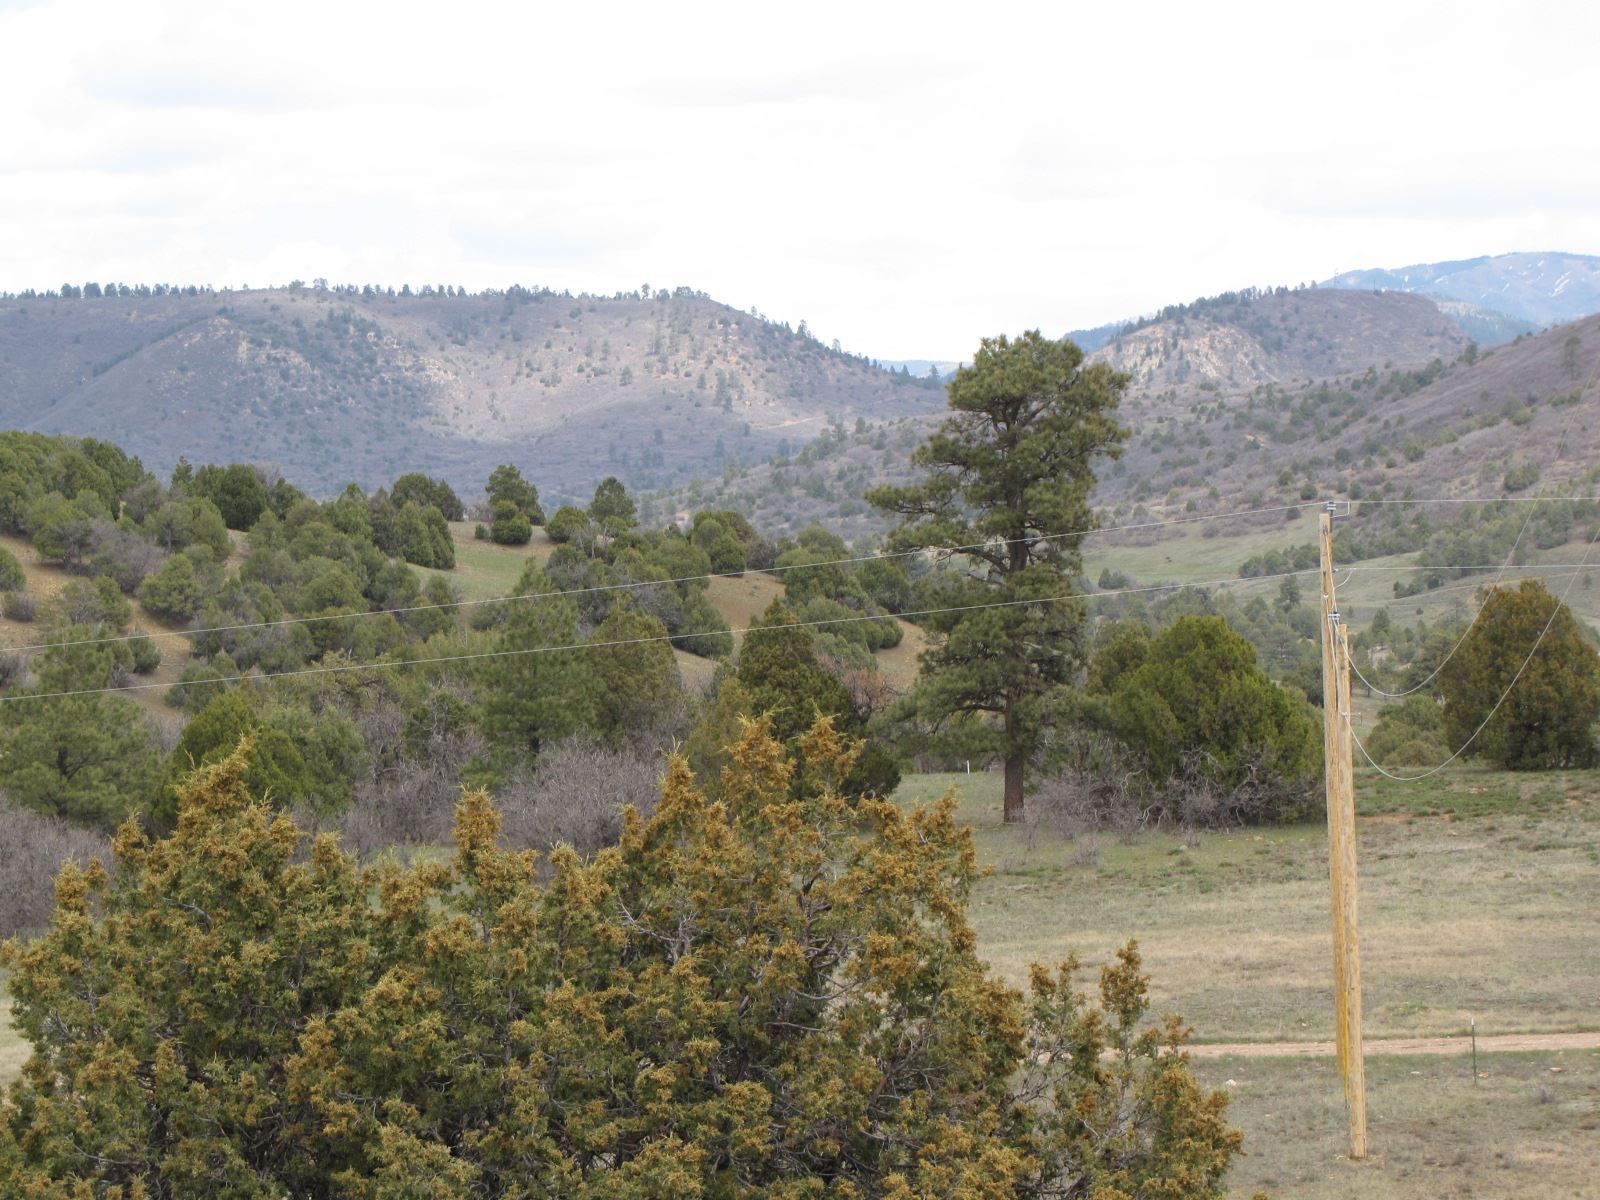 0 Tracts B & C Willow, Chama, New Mexico 87520, ,Land,For Sale,0 Tracts B & C Willow,201902099